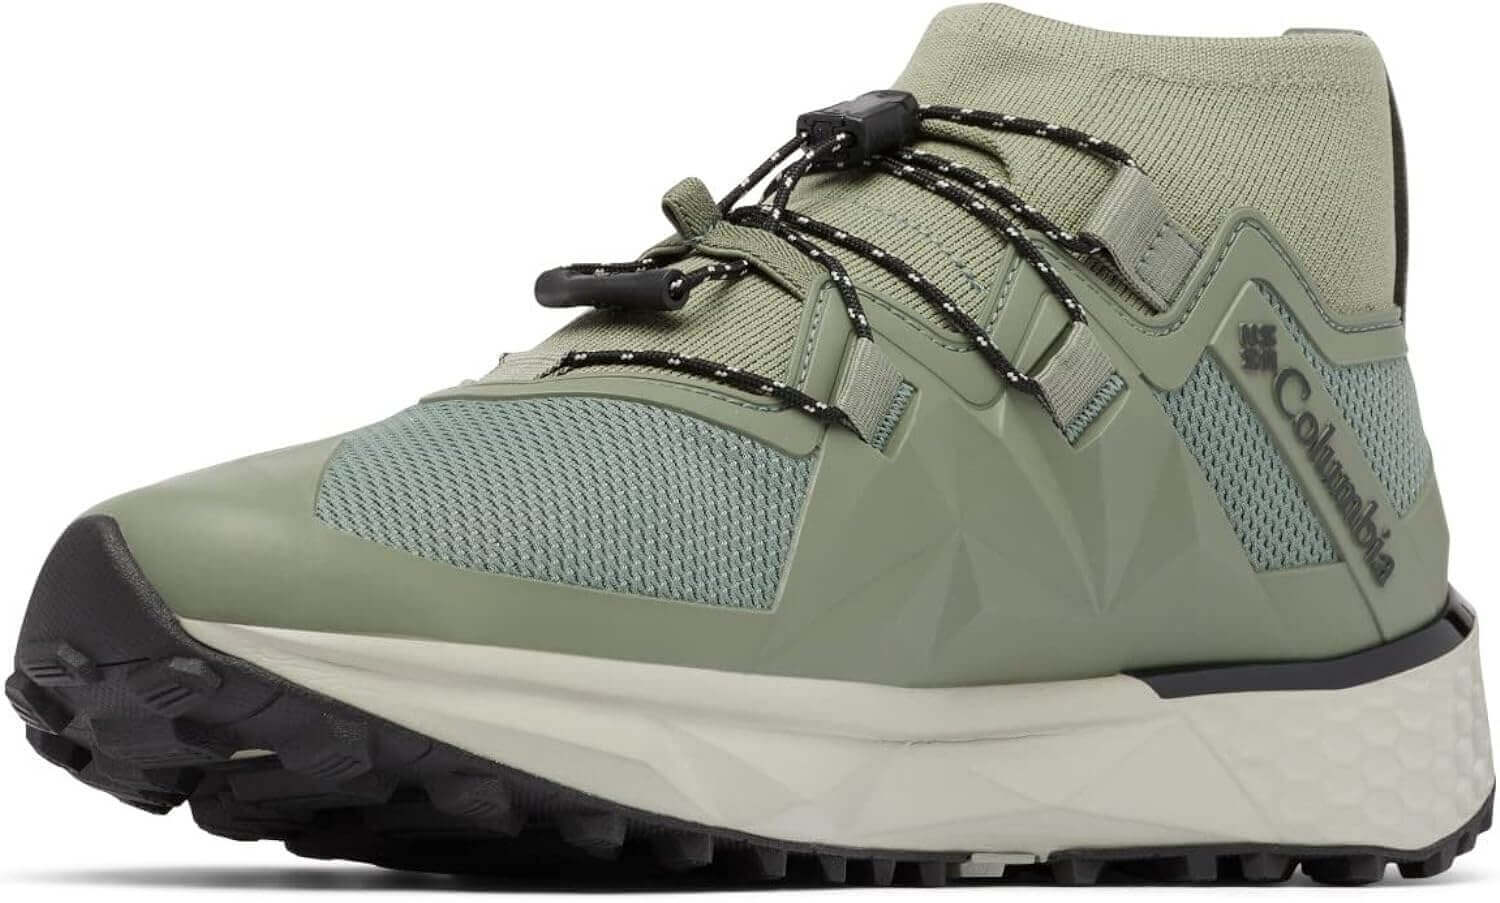 Shop The Latest >Columbia Men's Facet 75 Alpha Outdry Hiking Shoe > *Only $155.84*> From The Top Brand > *Columbial* > Shop Now and Get Free Shipping On Orders Over $45.00 >*Shop Earth Foot*